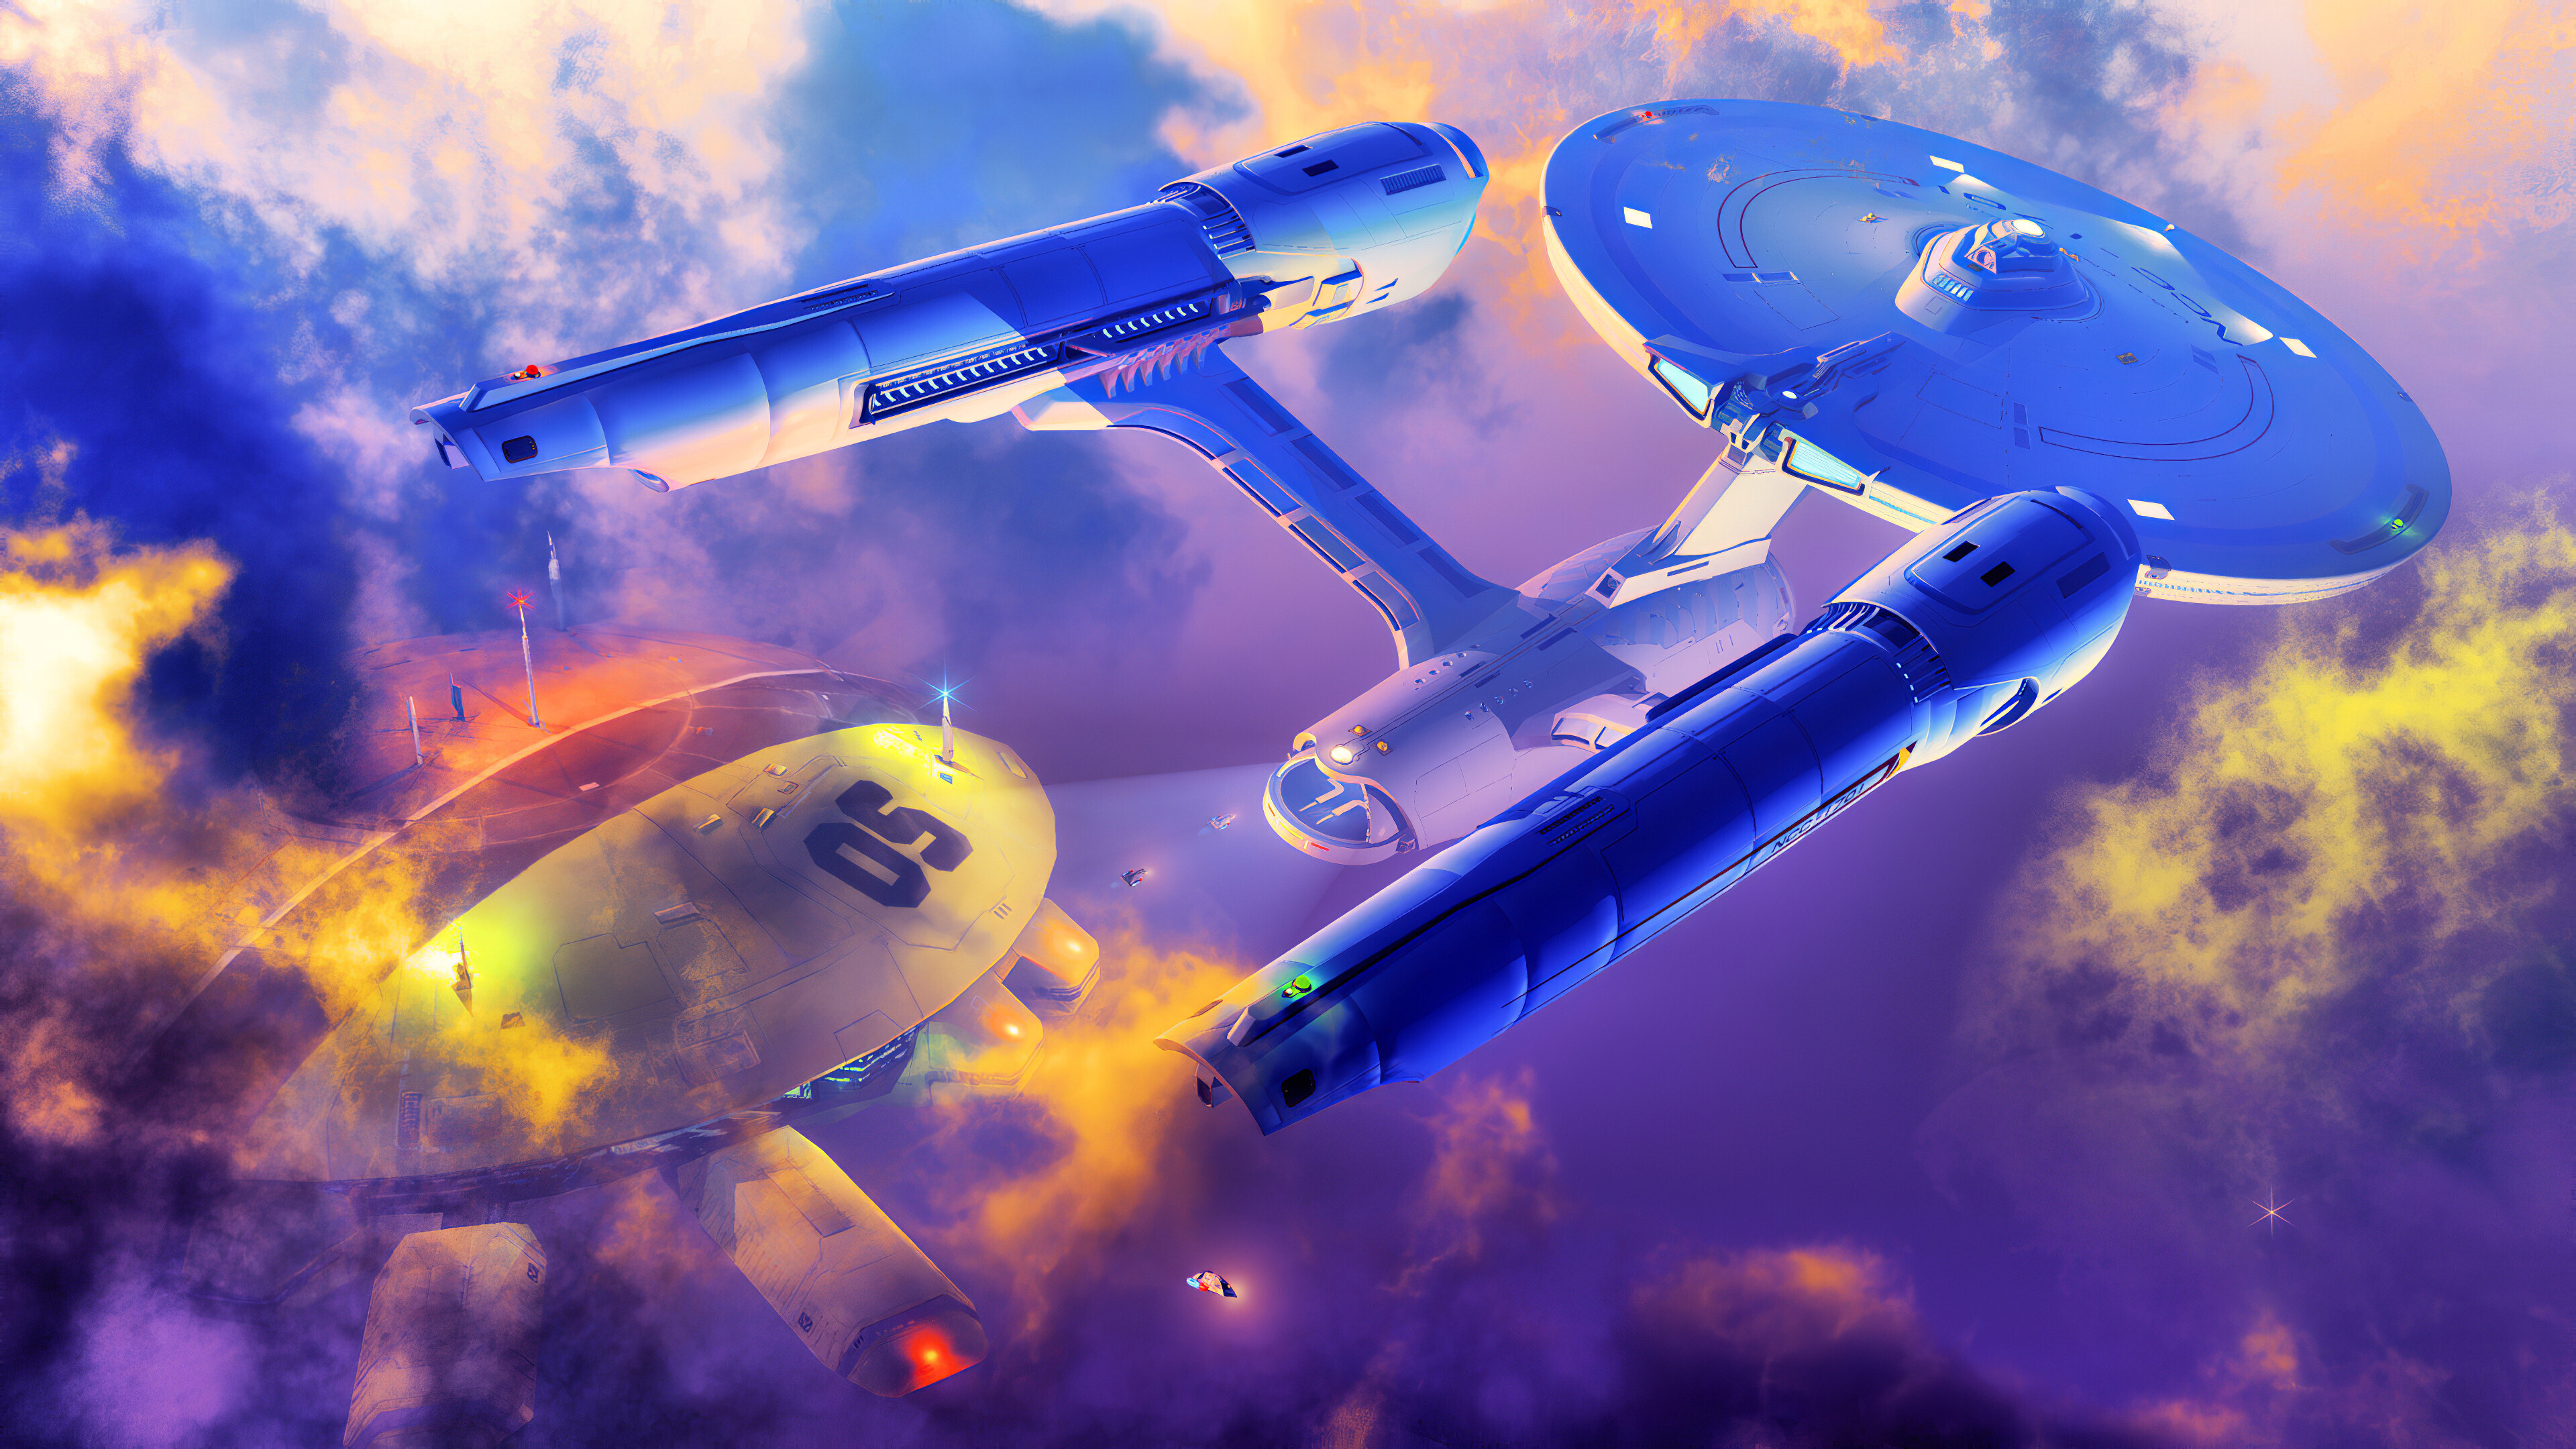 Star Trek: The USS Enterprise, A Federation Constitution-class starship in service to Starfleet during the 23rd century. 3840x2160 4K Background.